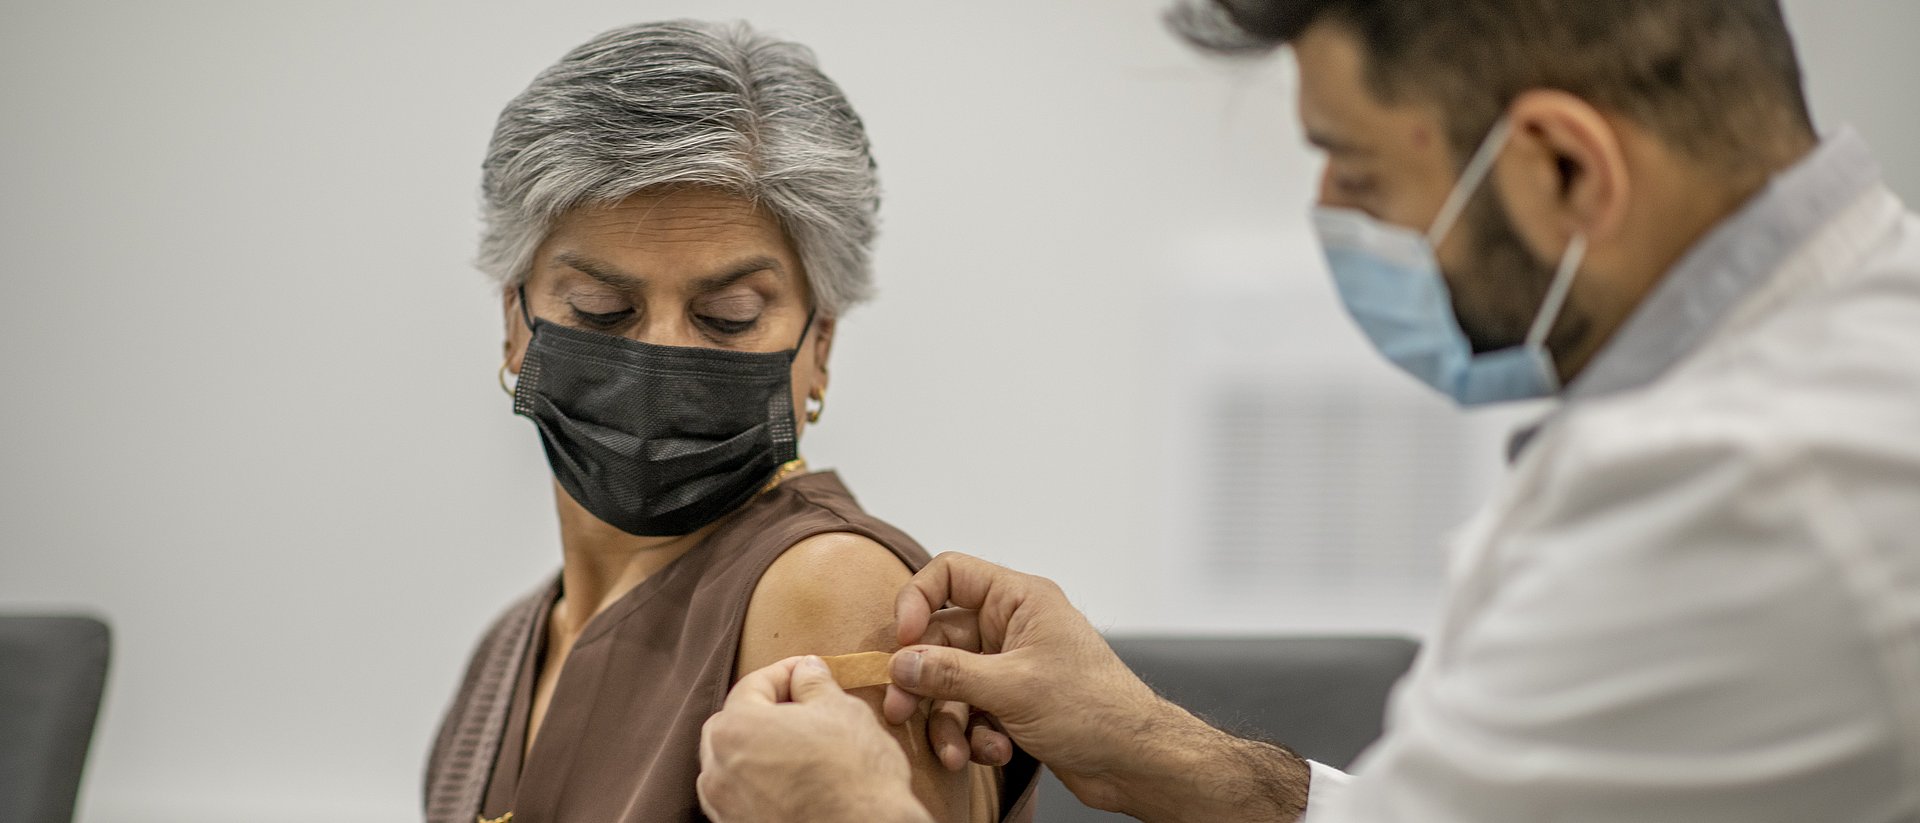 A woman gets vaccinated by a doctor